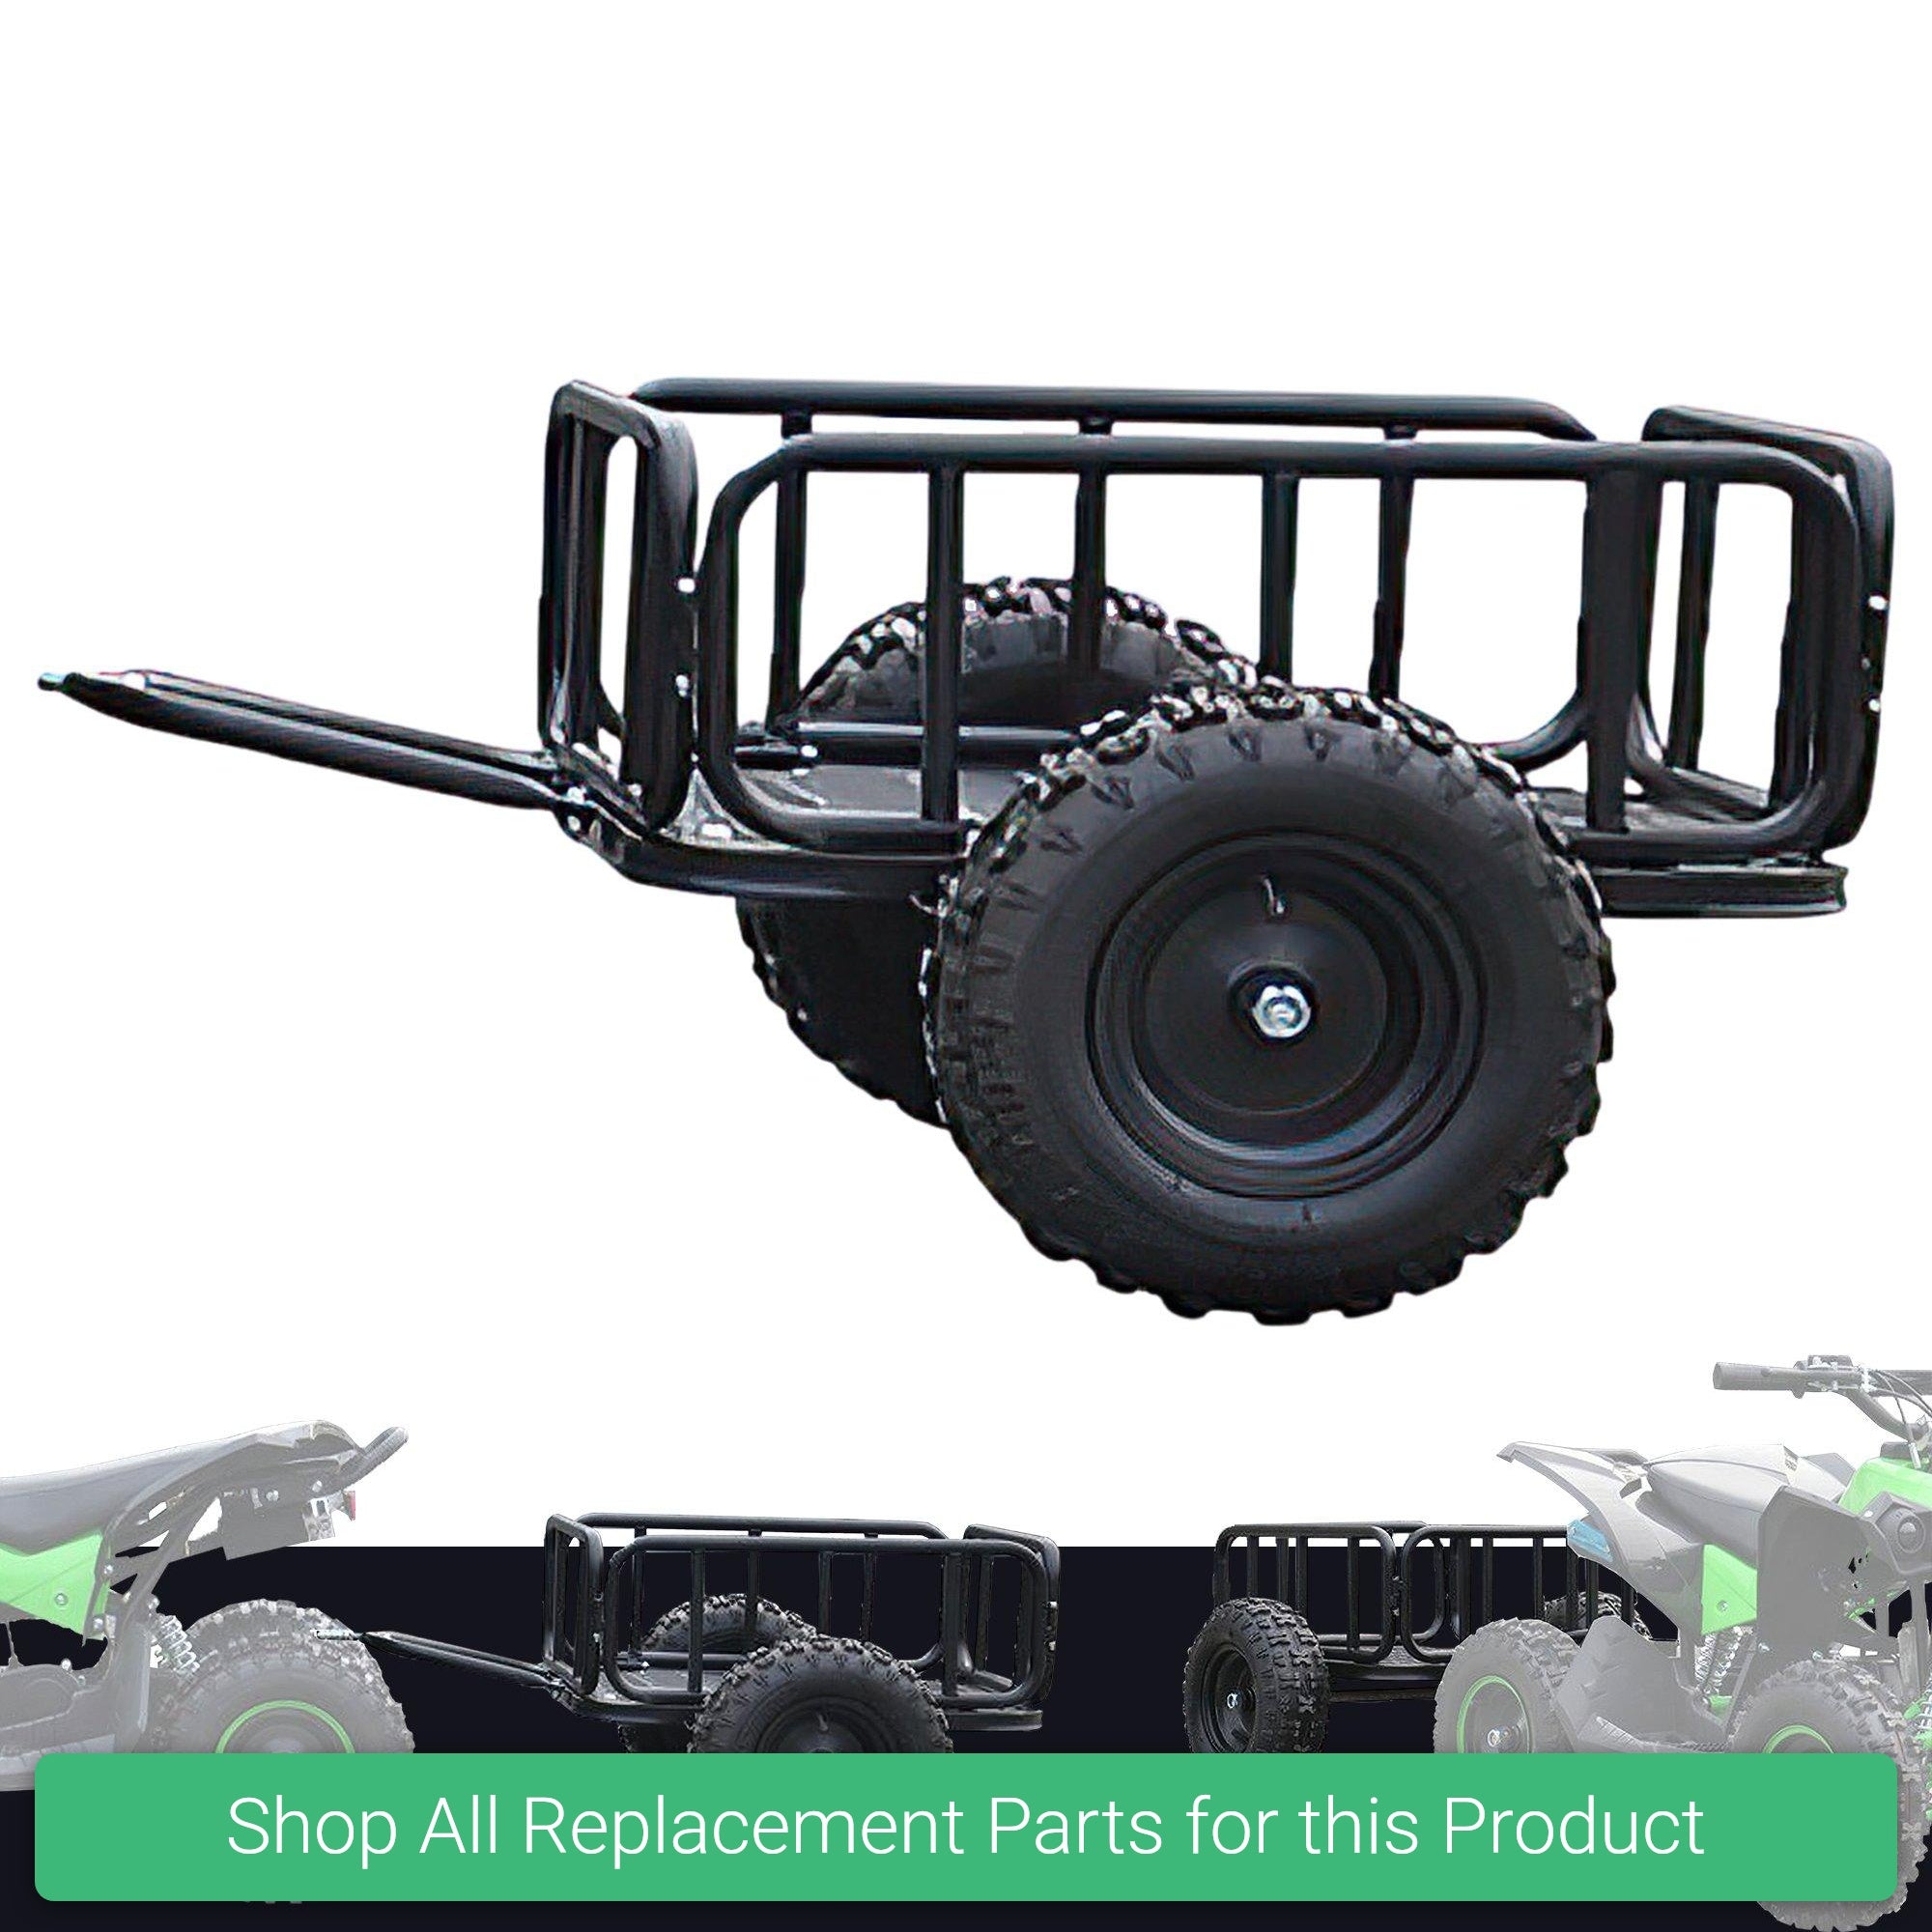 Replacement Parts and Spares for Kids Mini Quad Trailer - OneQuad™ Compatible - OneTractor-PX2S-ADDON-Black - Mini Trailer For ATV-Black